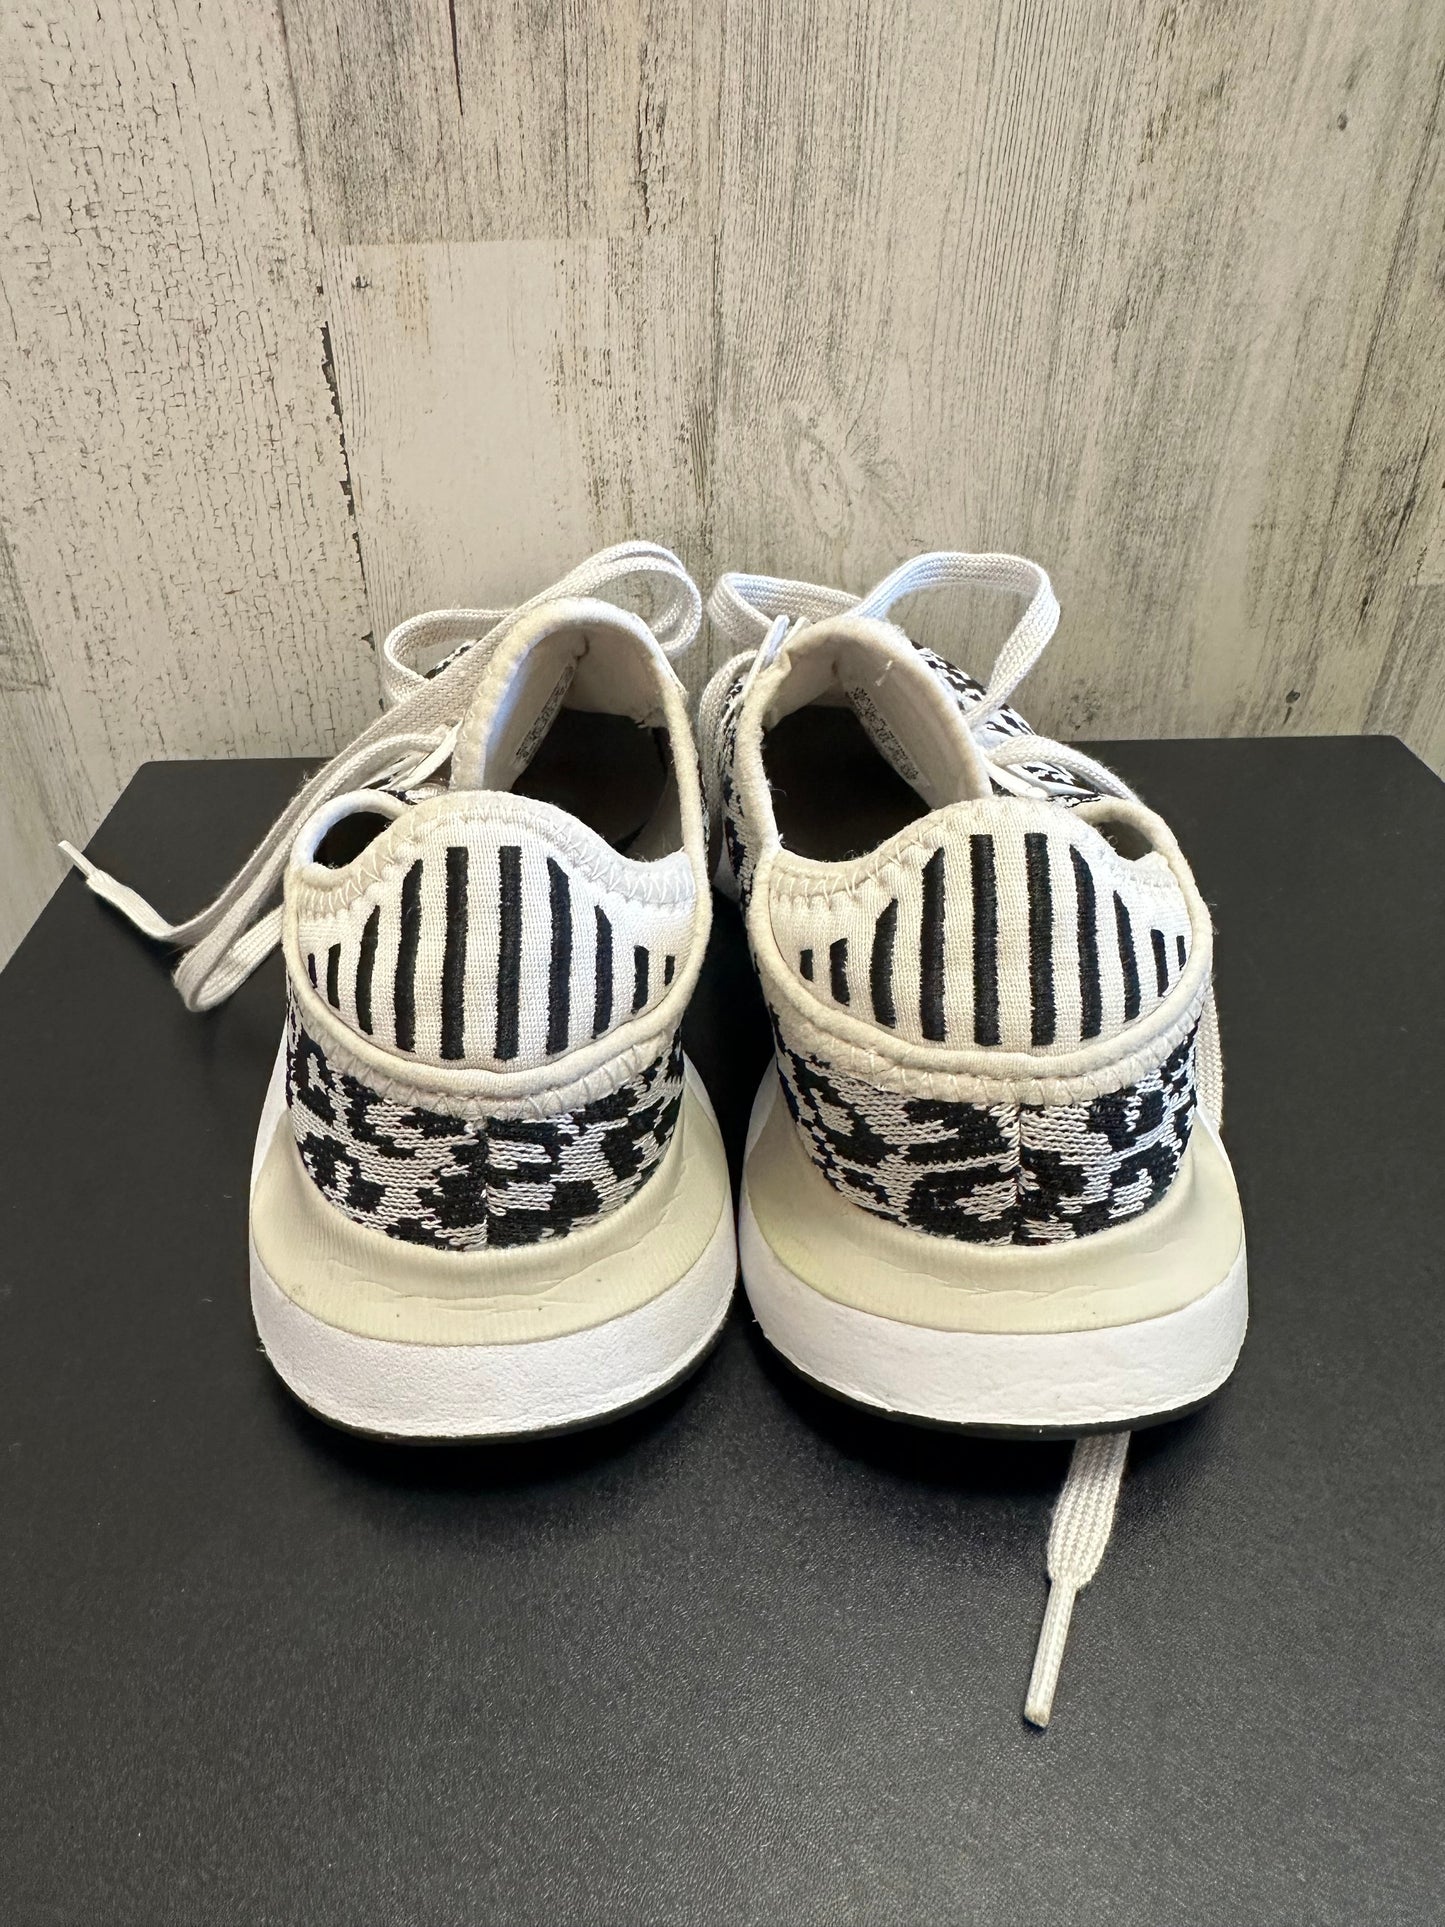 Animal Print Shoes Sneakers Adidas, Size 6